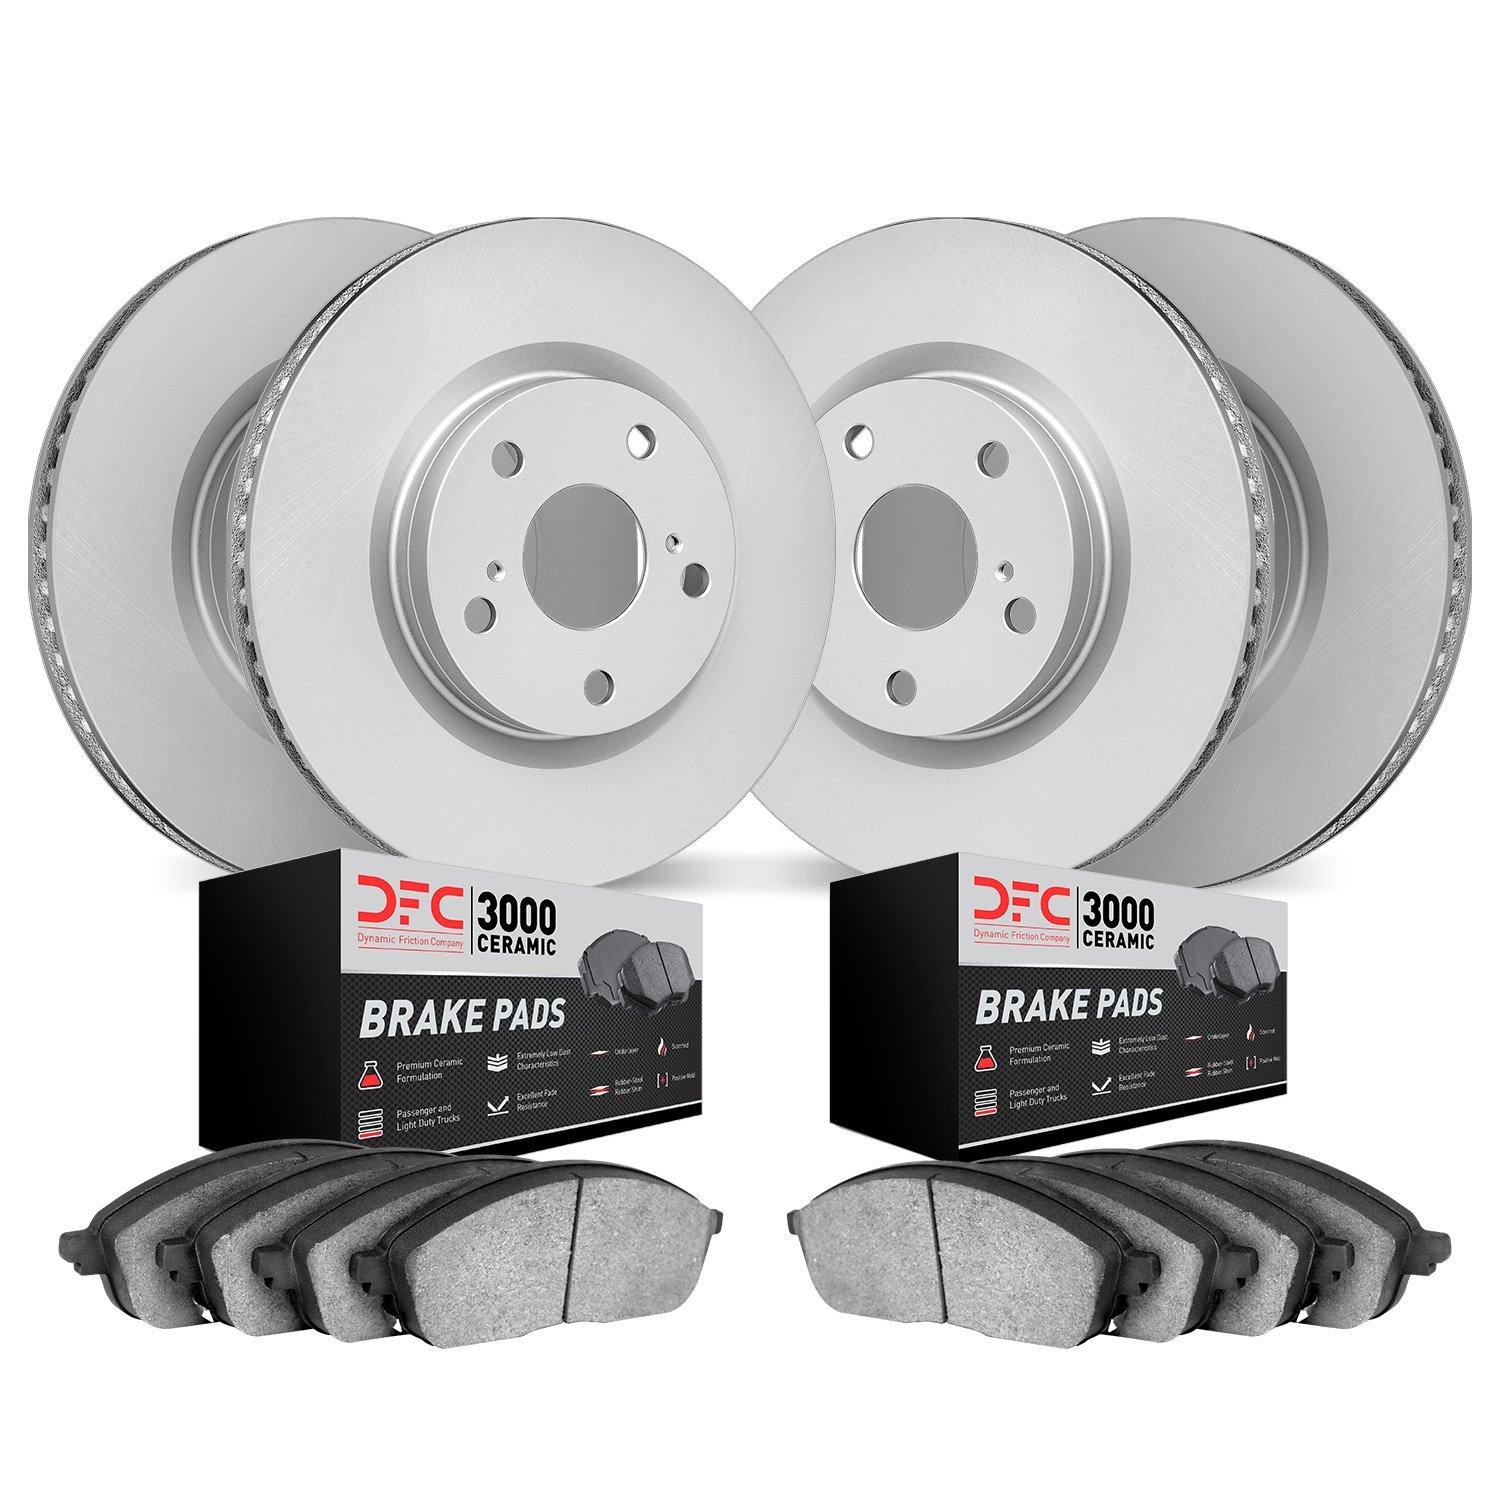 4304-31027 Geospec Brake Rotors with 3000-Series Ceramic Brake Pads Kit, 1996-2003 BMW, Position: Front and Rear